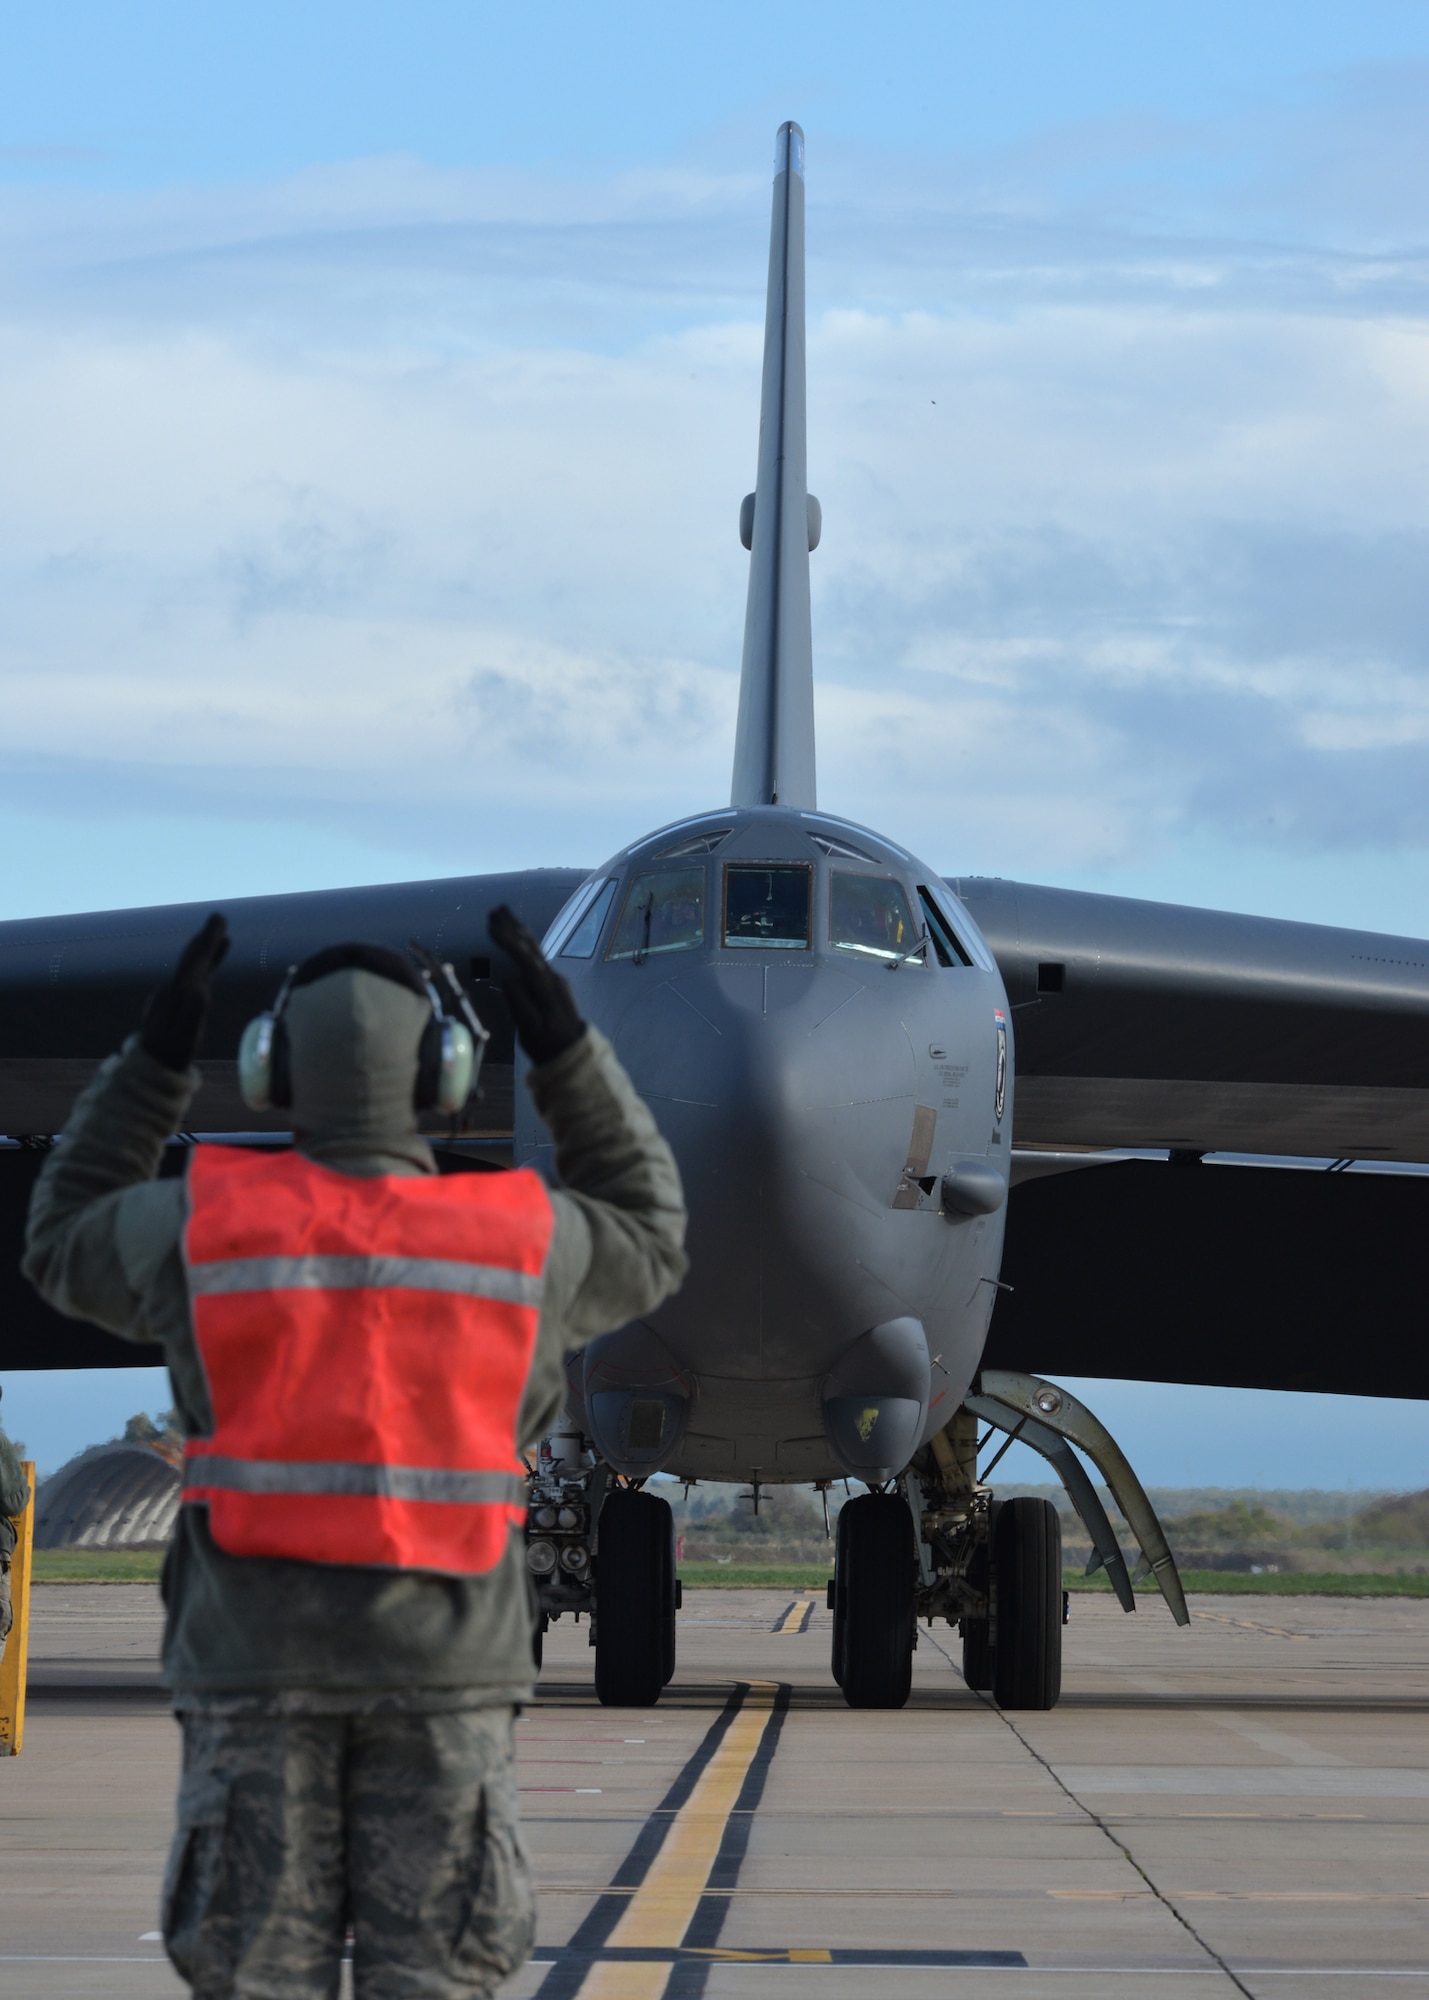 A crew chief from the 2nd Expeditionary Bomb Group guides a B-52 Stratofortress into its parking spot at Morón Air Base, Spain, Feb. 27, 2016. This B-52 and two others will join KC-135 Stratotankers and F-16 Fighting Falcons as the U.S. air component during Cold Response 16, a biennial NATO military exercise. Participants will experience sub-freezing temperatures in the Trøndelag region of Norway over the course of the nearly two-week exercise. (U.S. Air Force photo/Senior Airman Joseph Raatz)